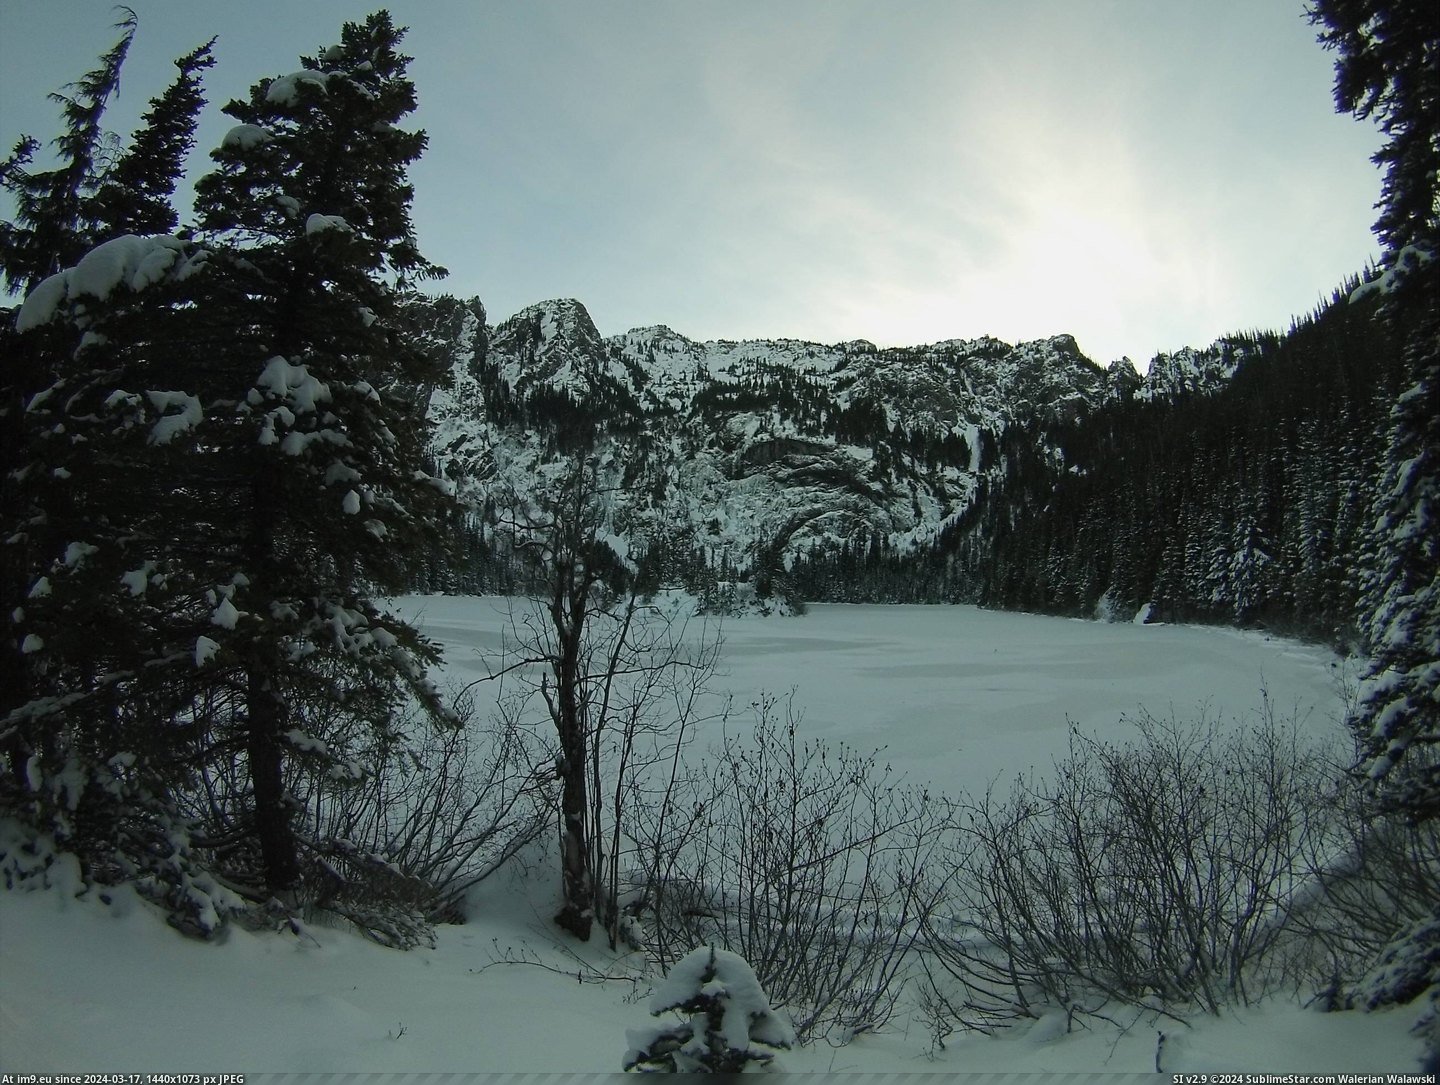 #Park #National #Angeles #2592x1944 #Olympic #Lake #1st [Earthporn] Lake Angeles in Olympic National Park, January 1st. [2592x1944] Pic. (Изображение из альбом My r/EARTHPORN favs))